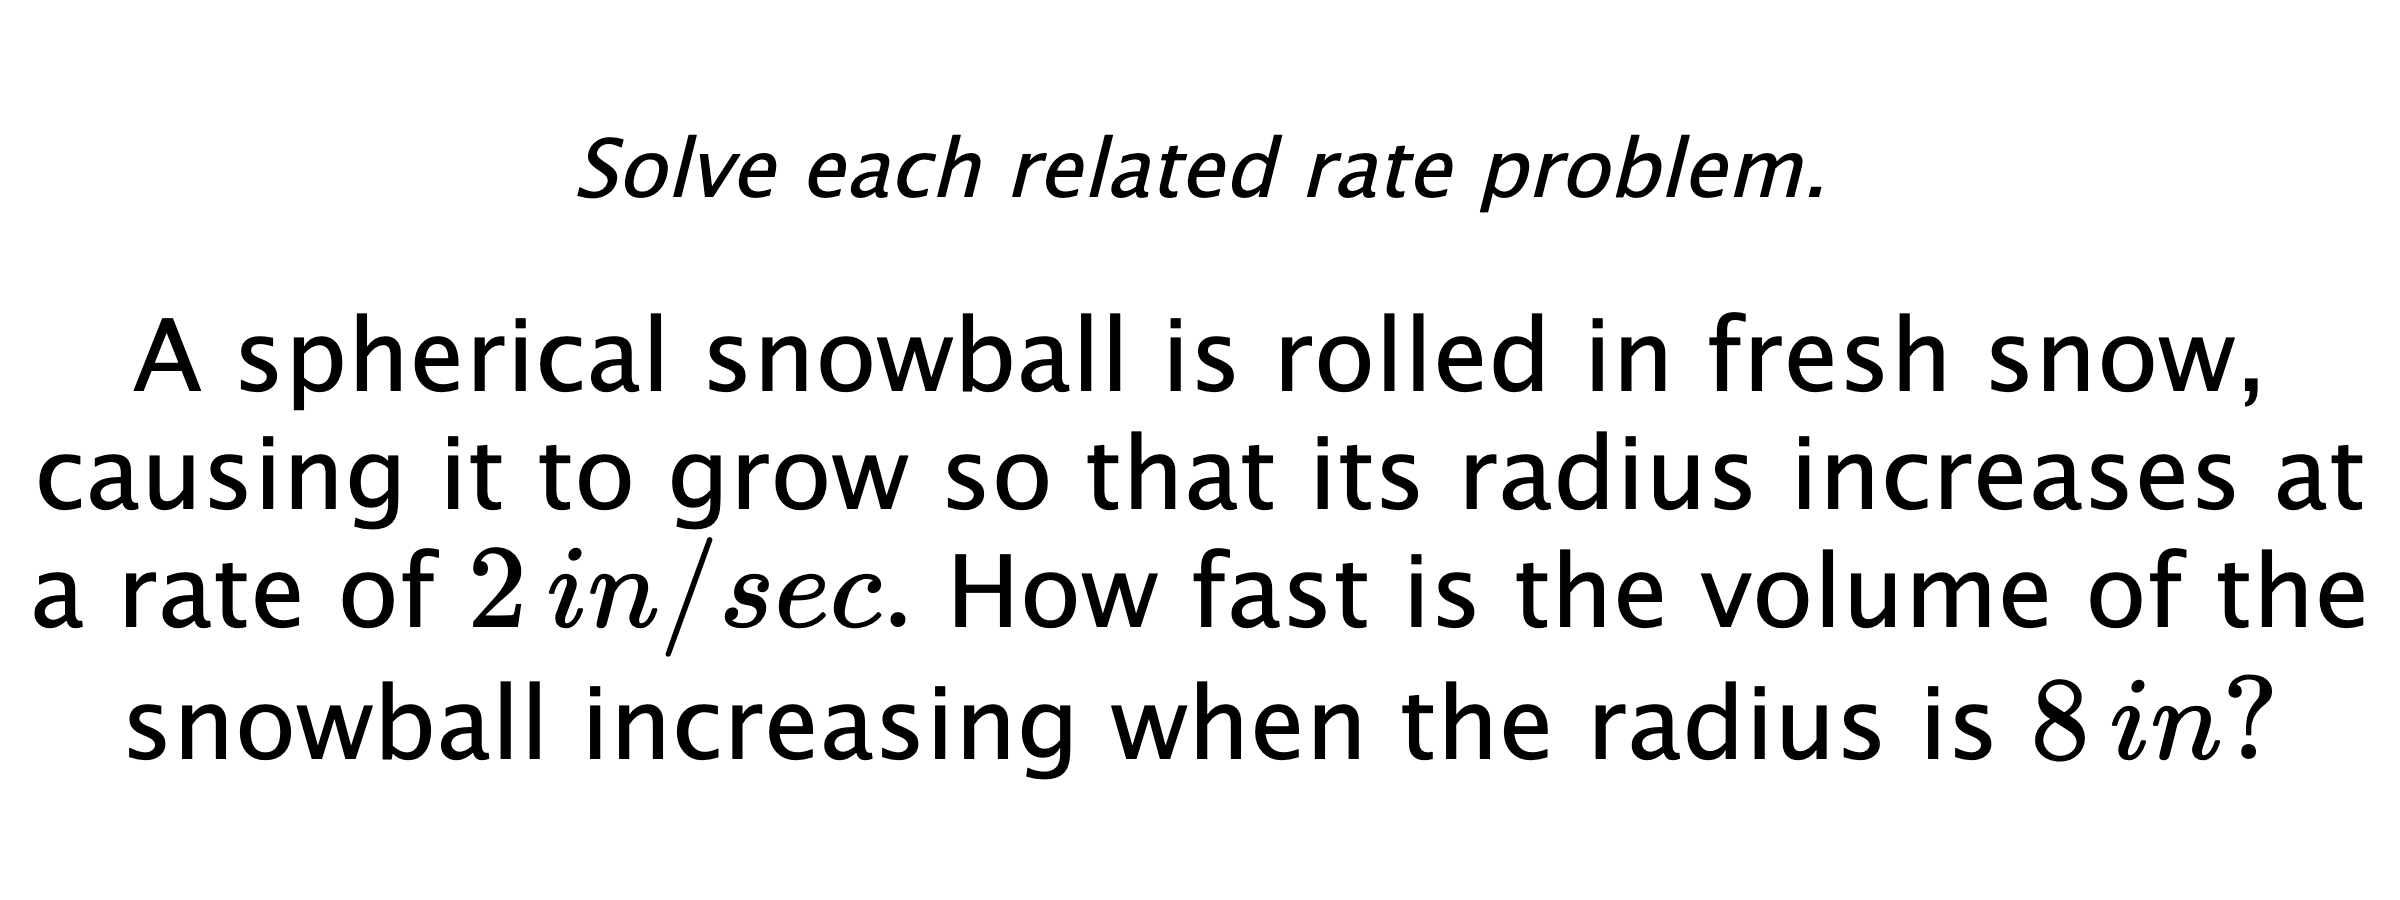 Solve each related rate problem. A spherical snowball is rolled in fresh snow, causing it to grow so that its radius increases at a rate of $2\,in/sec.$ How fast is the volume of the snowball increasing when the radius is $8\,in?$